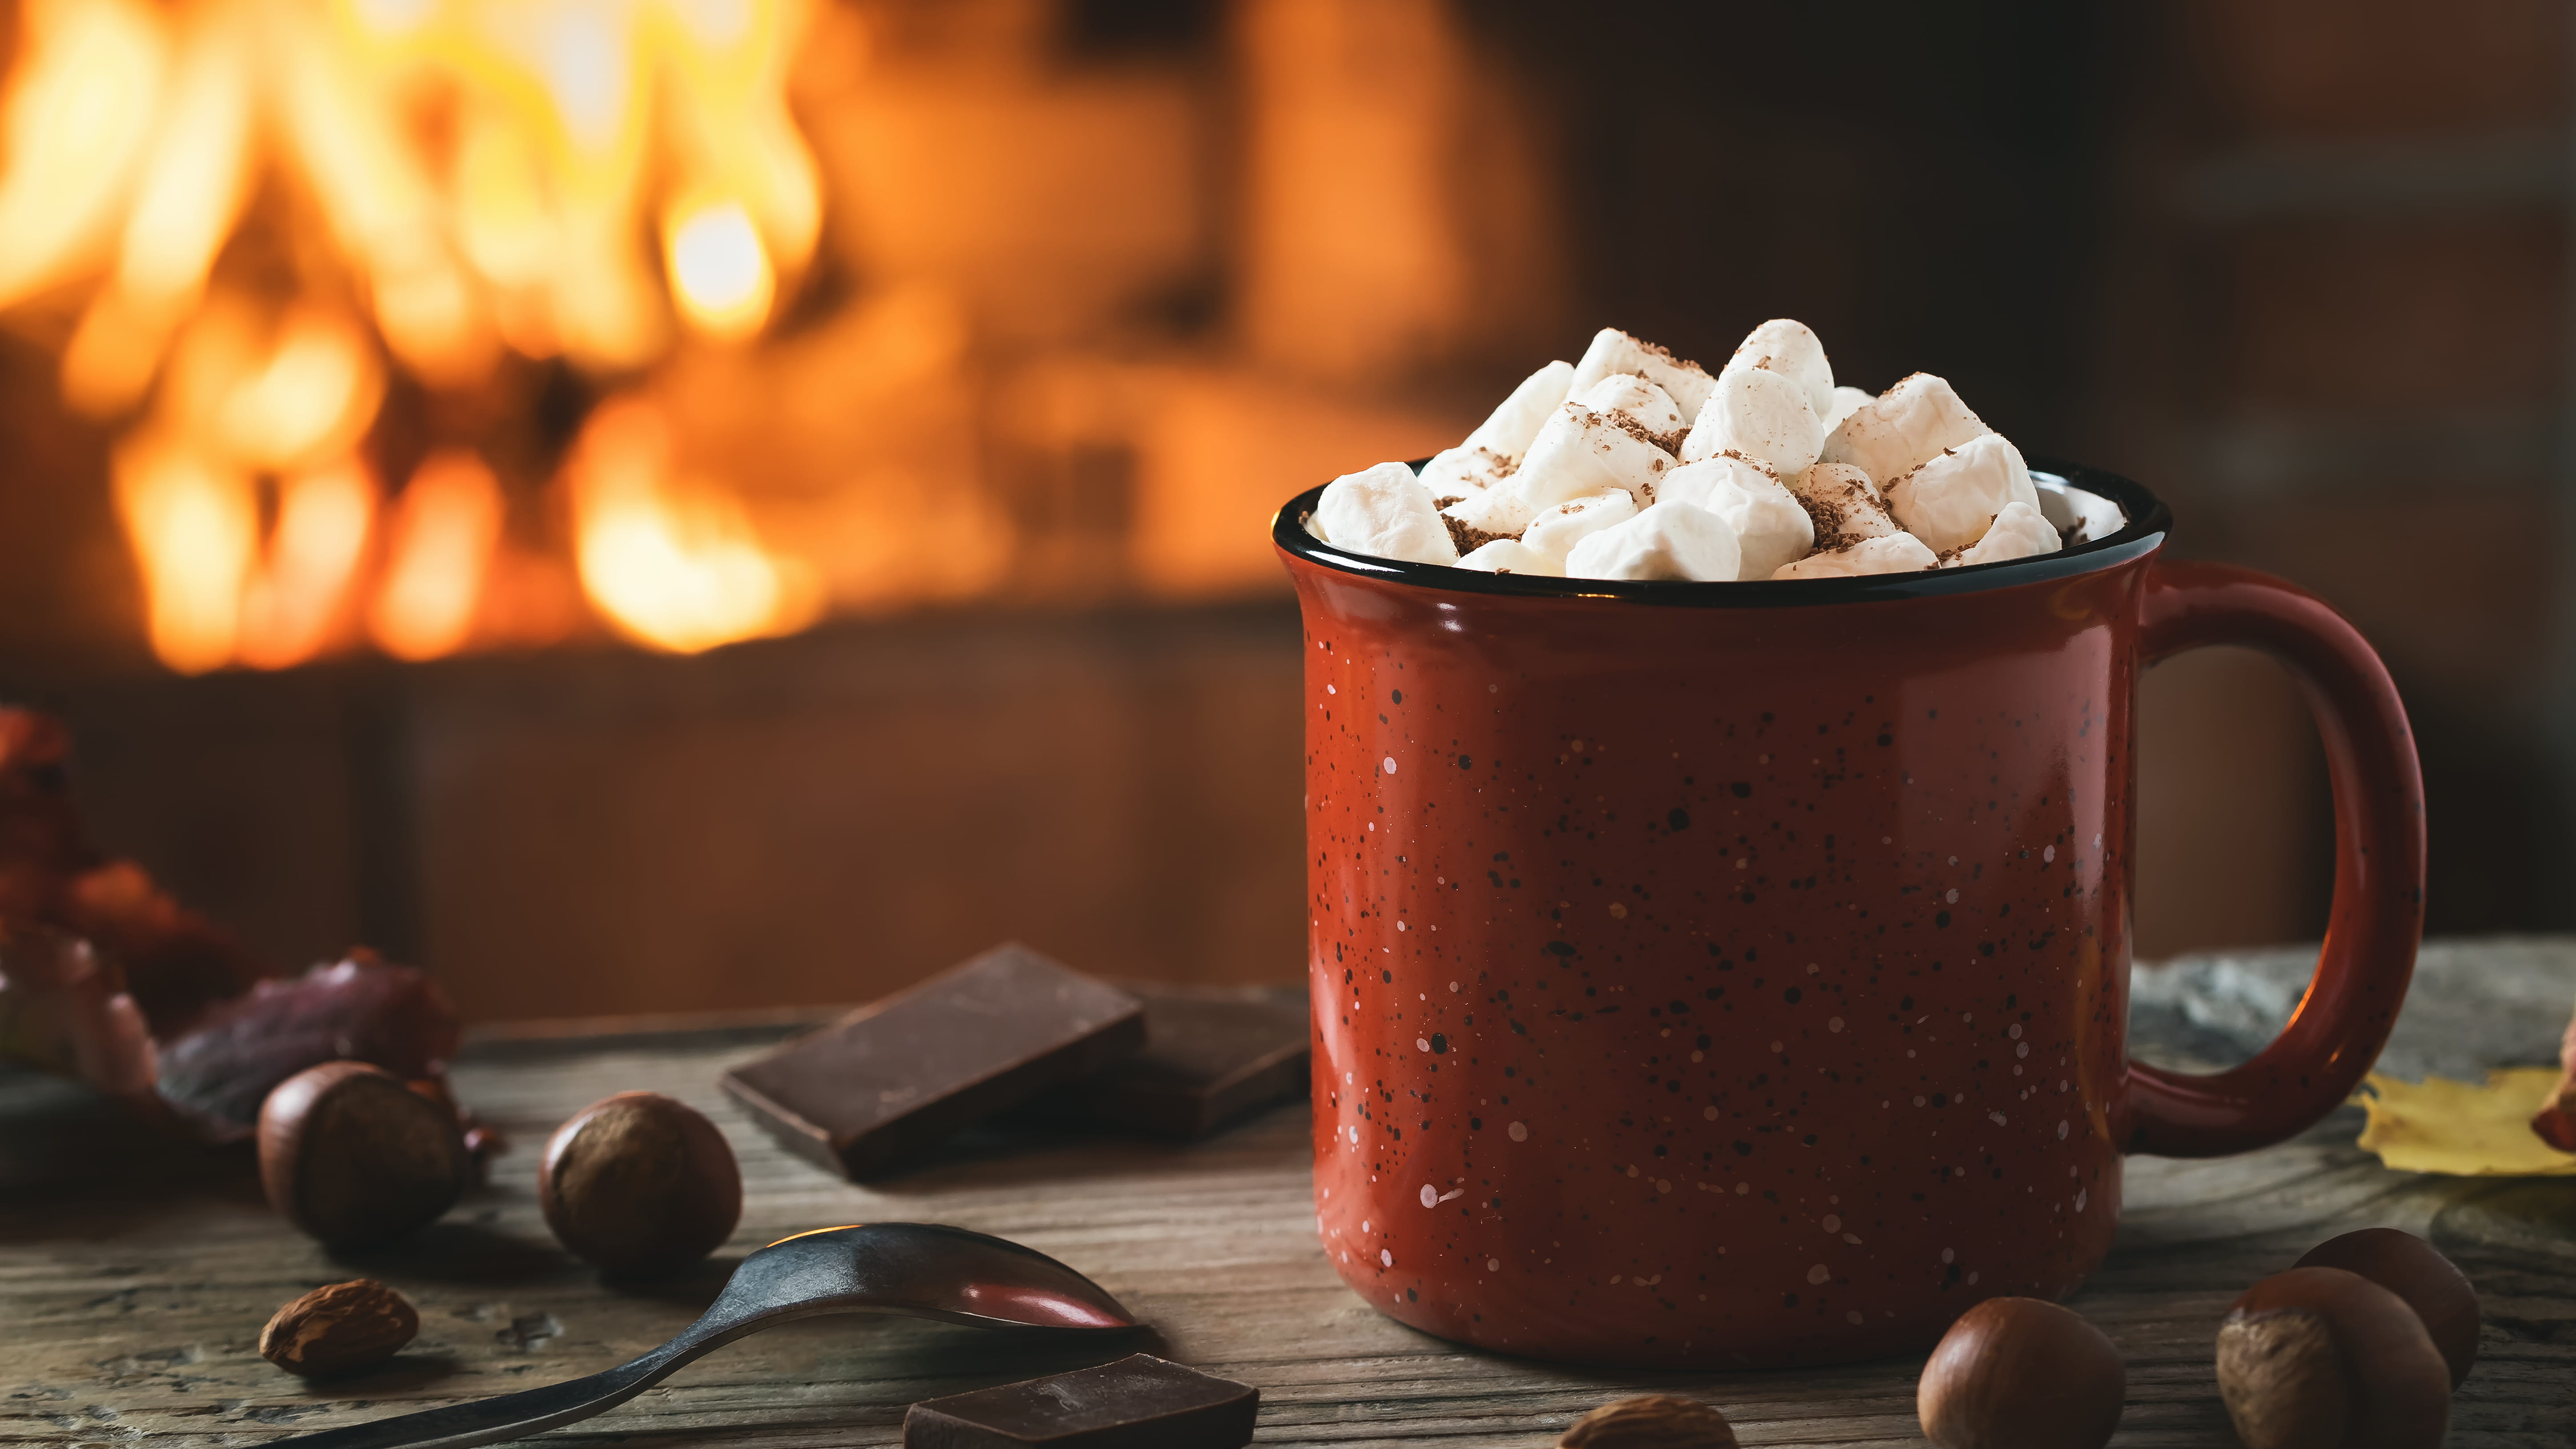 https://www.mccormick.com/-/media/project/oneweb/mccormick-us/mccormick/articles/hello-festive-hot-cocoa-try-these-hot-chocolate-recipes-for-a-cozy-holiday-url.jpeg?rev=d84ff4c2dd5247a9817fe9a111dc4329&vd=20231031T090302Z&hash=9B1EFFEA5C97C3E56AD782659215E628